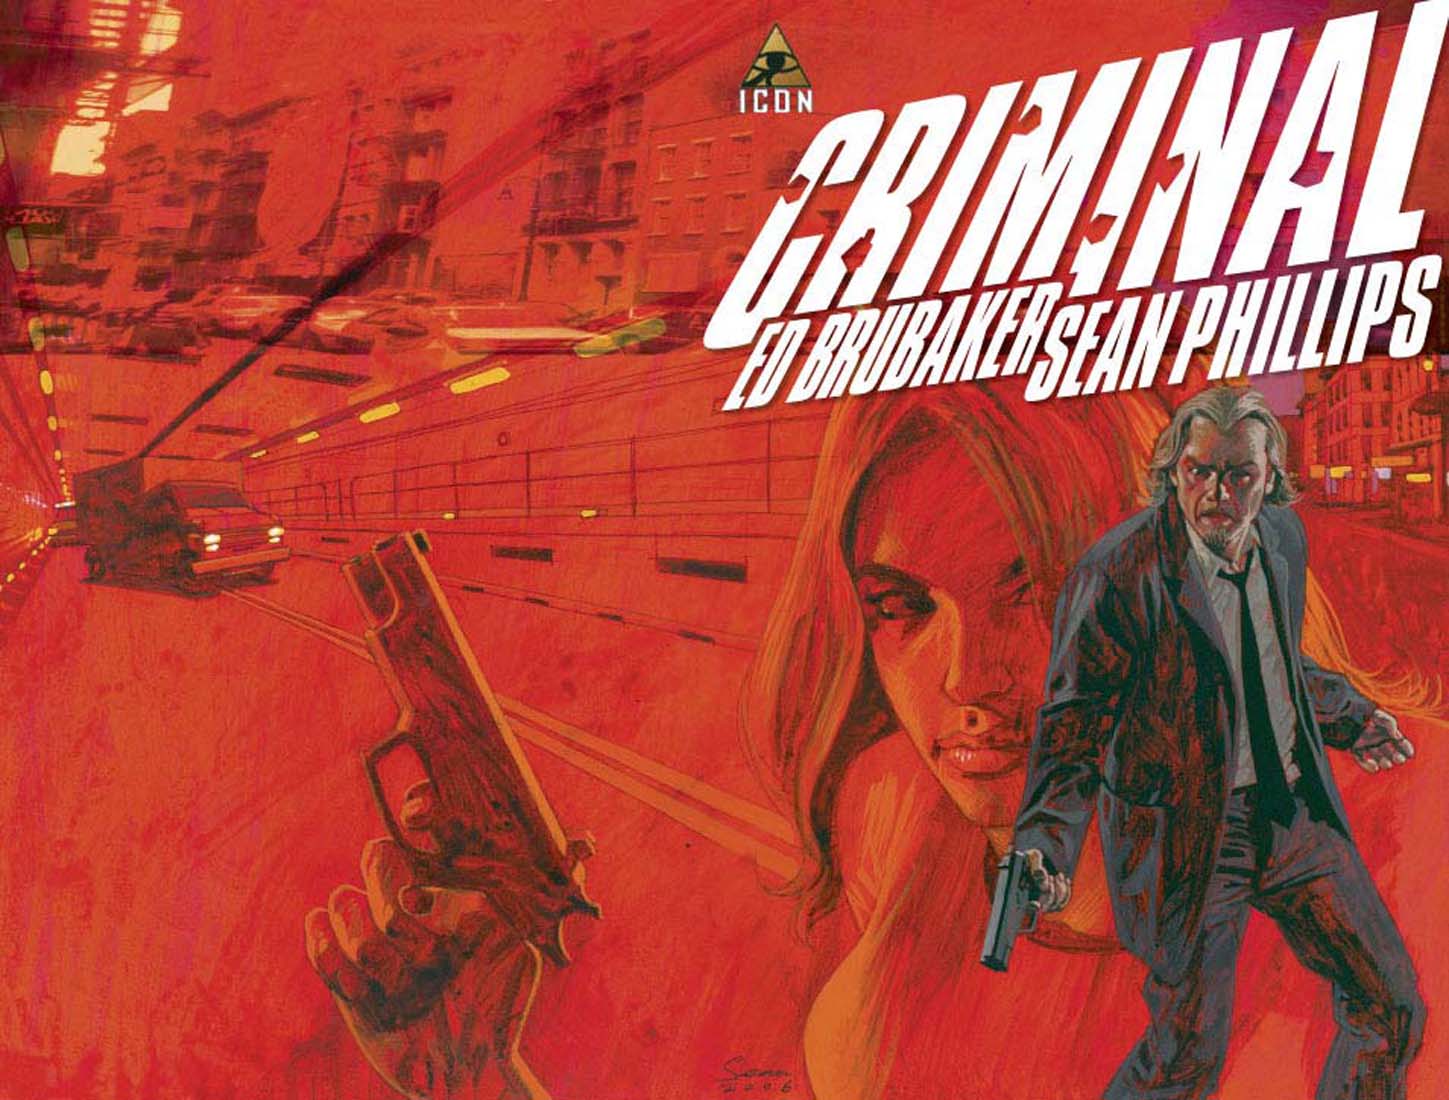 Criminal Vol.1 by Ed Brubaker and Sean Phillips